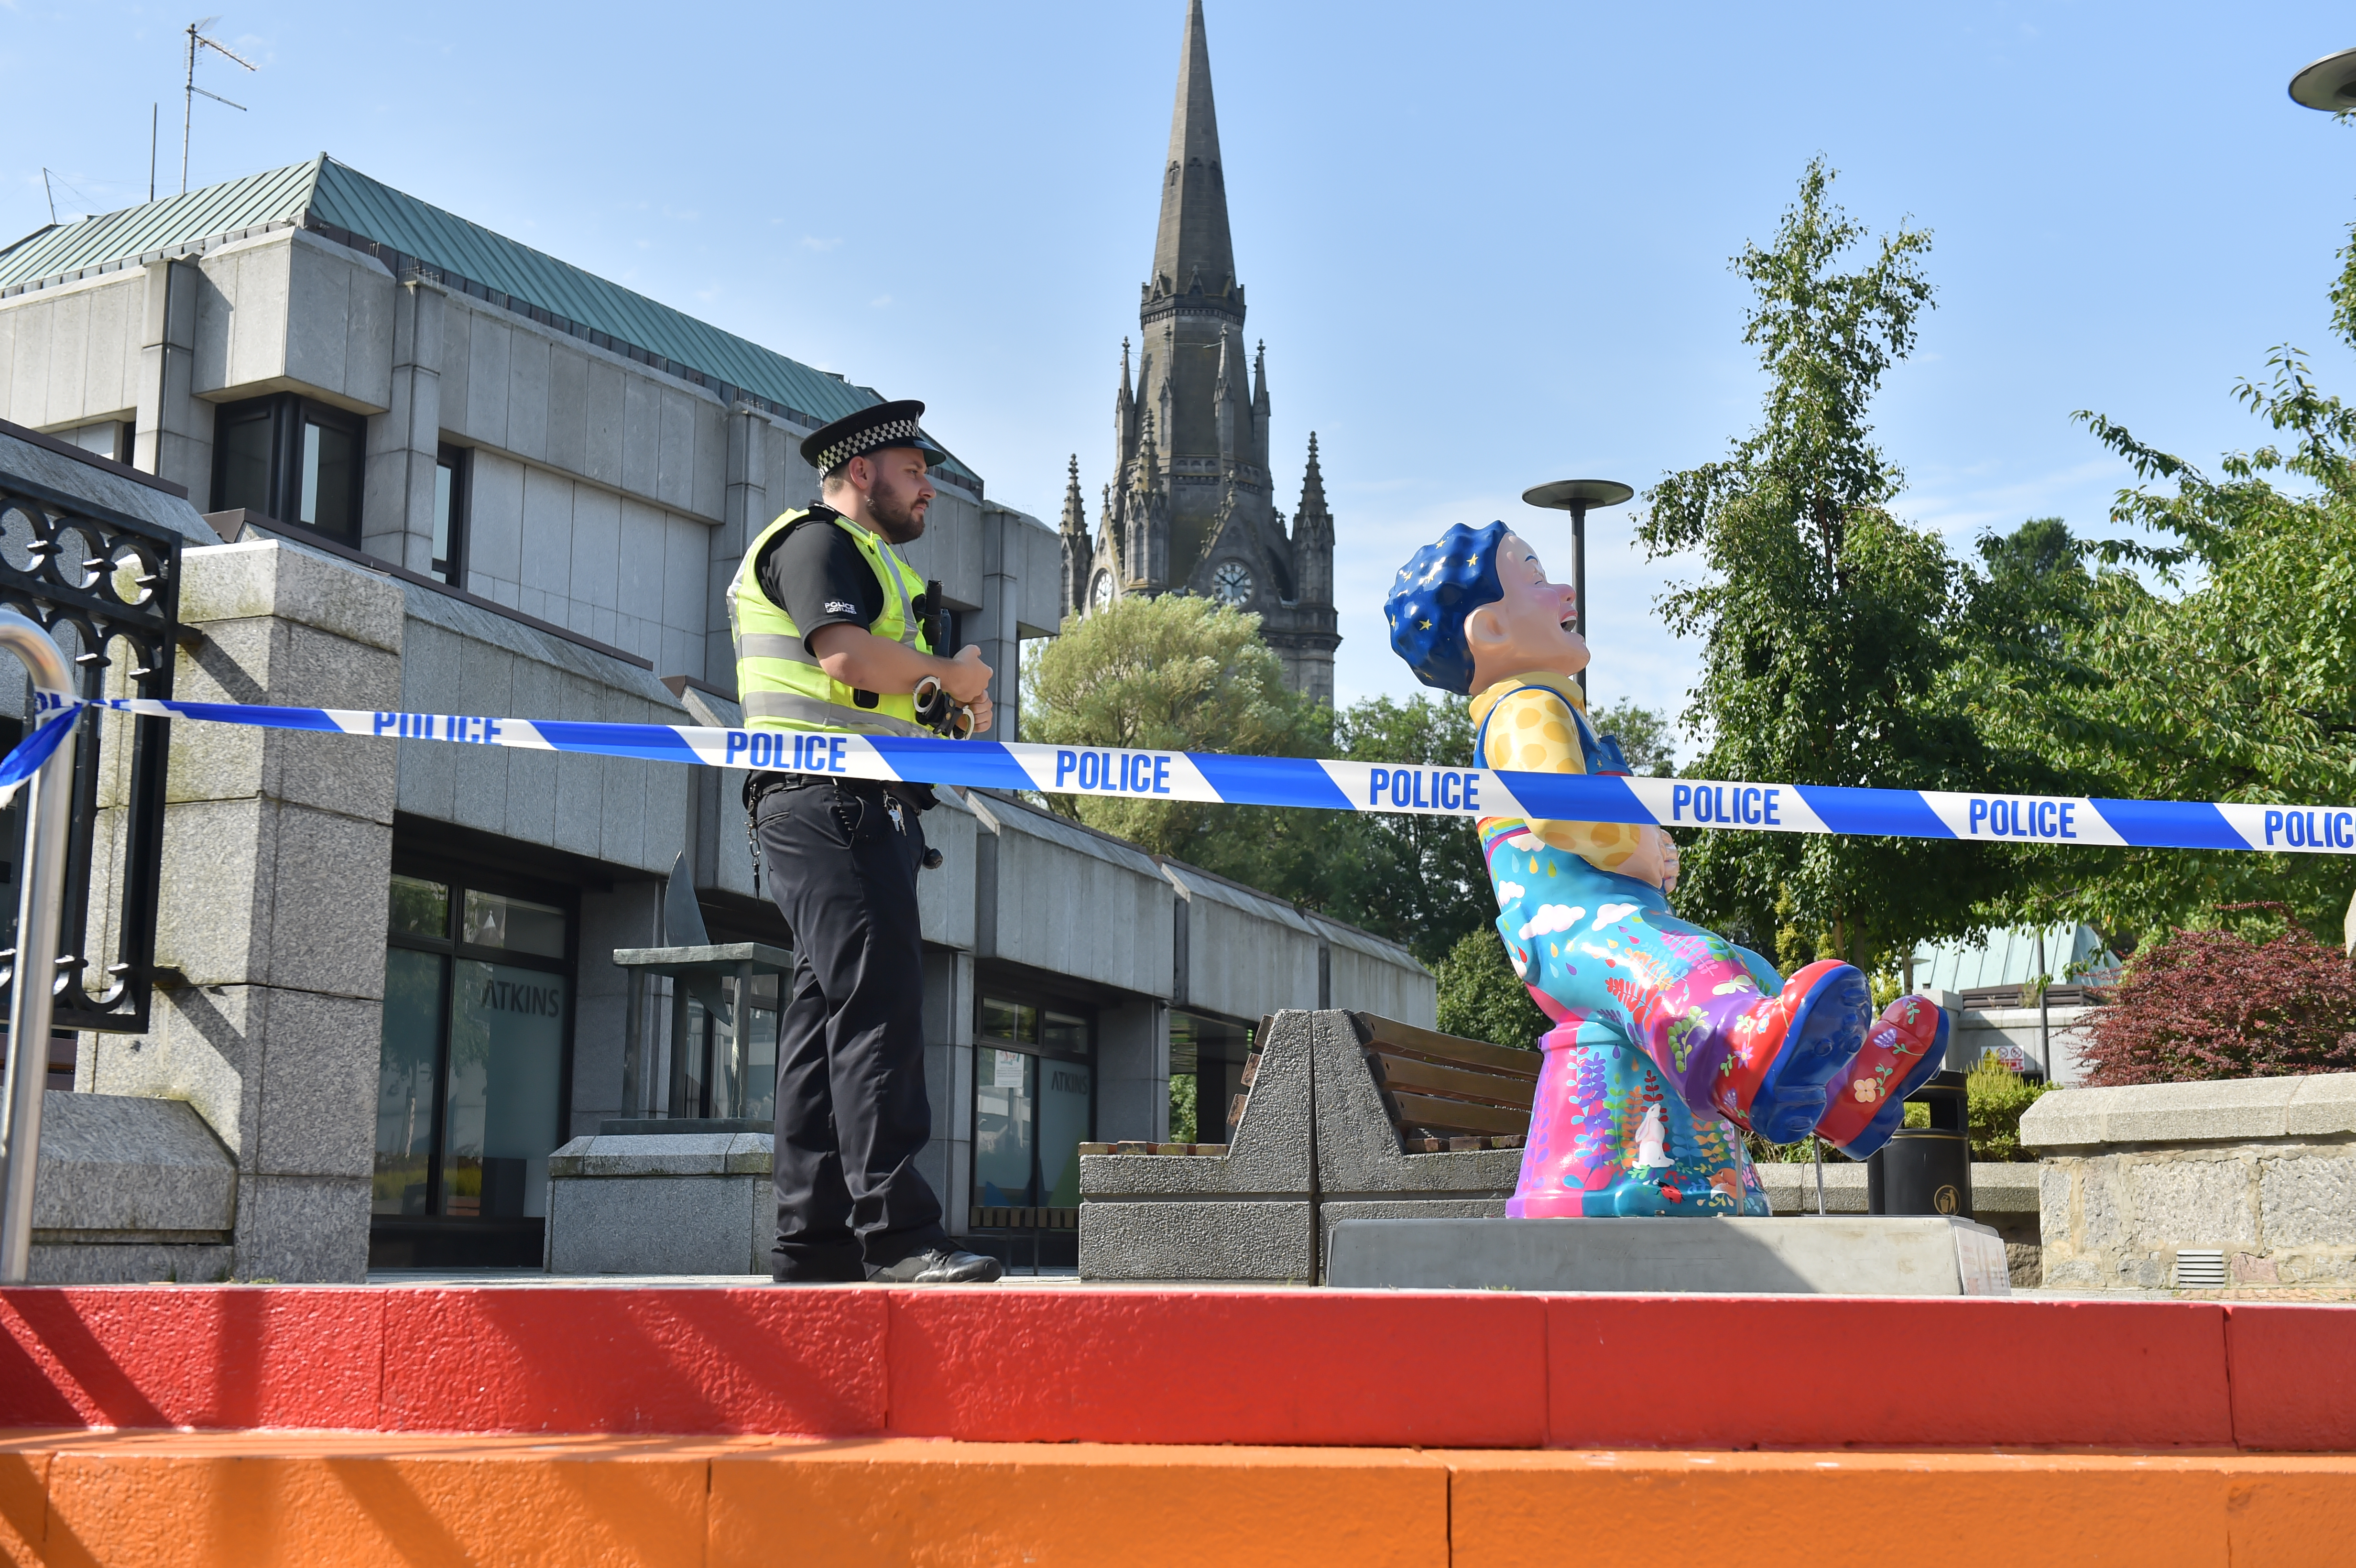 A police cordon has been set up at the Top Deck of the St Nicholas Centre in Aberdeen